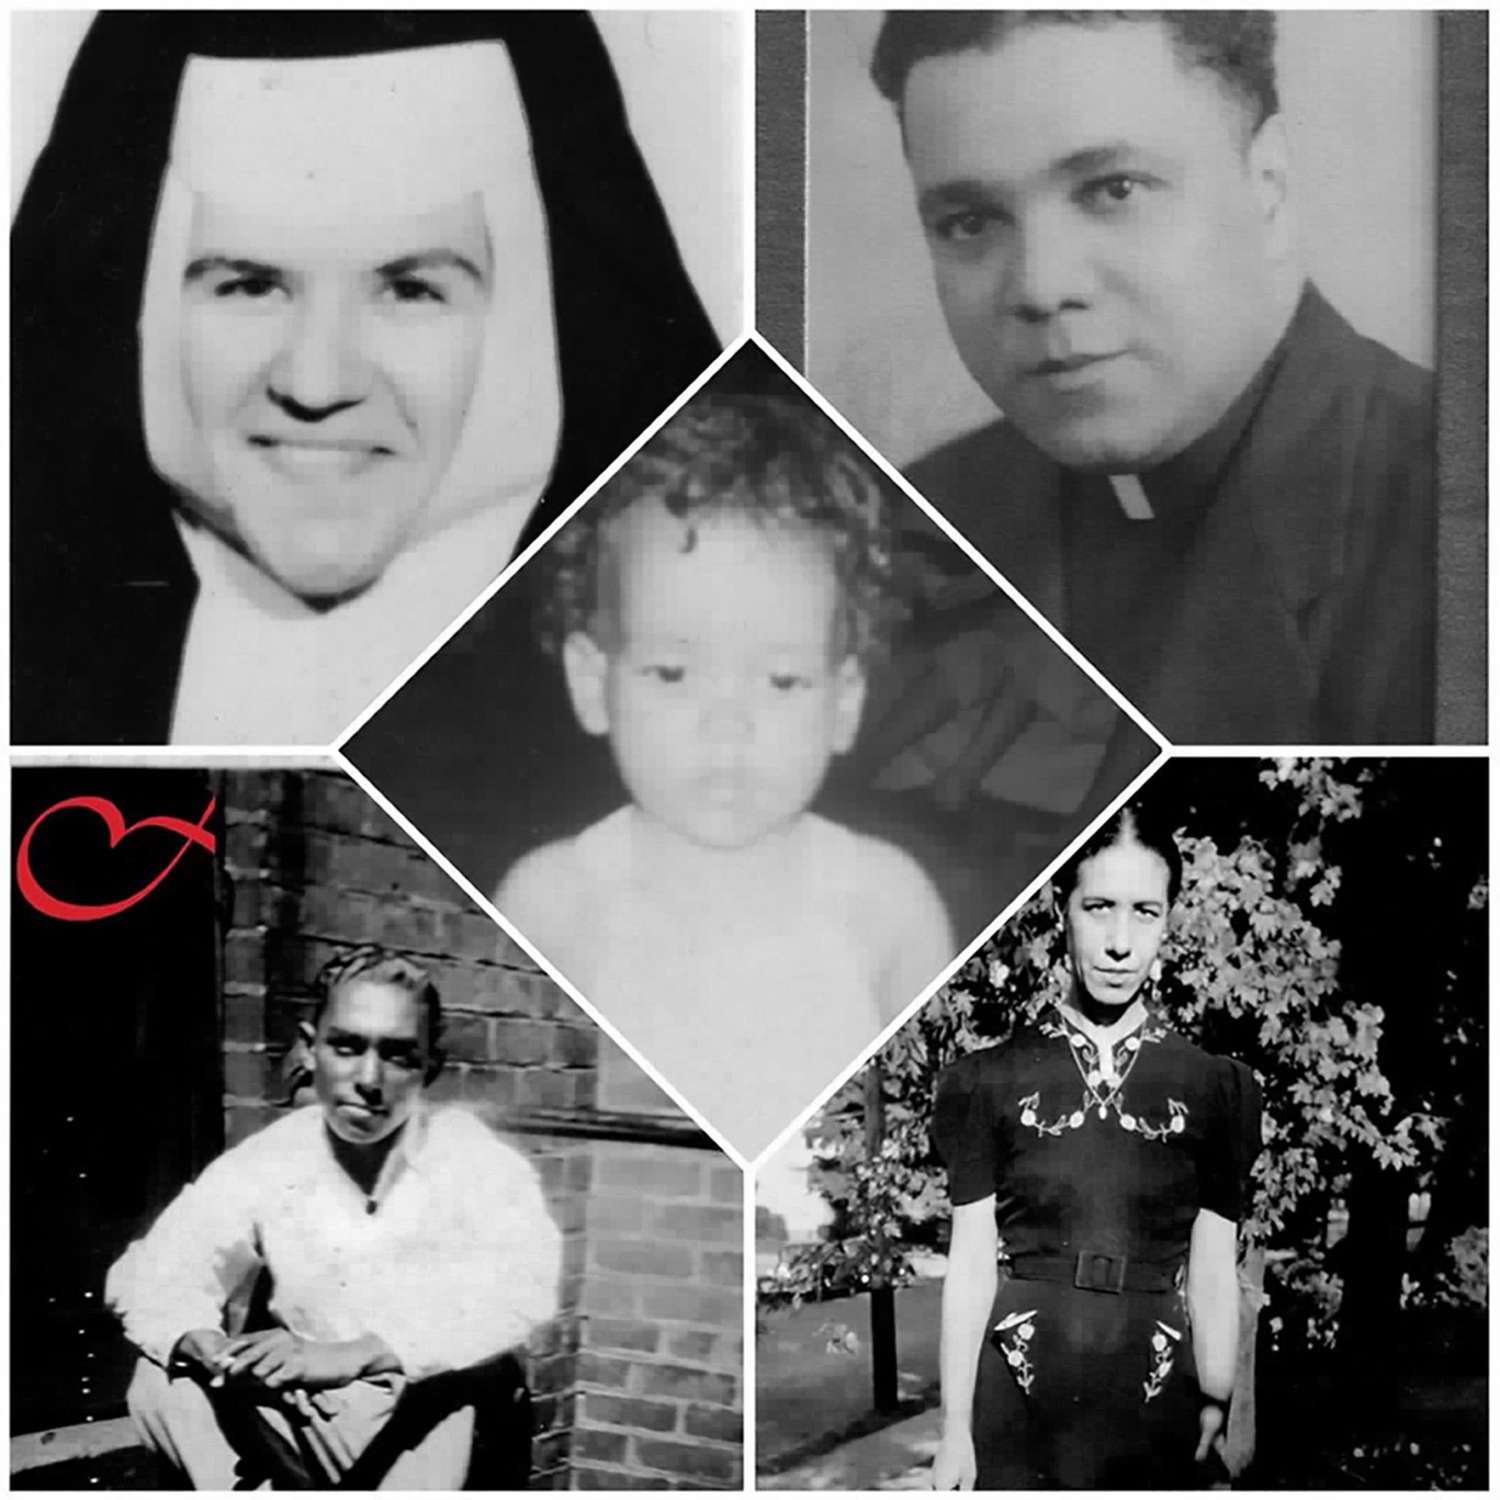 Priest William Grau and nun Sophie Legocki fell in love in the 50s and had a baby.